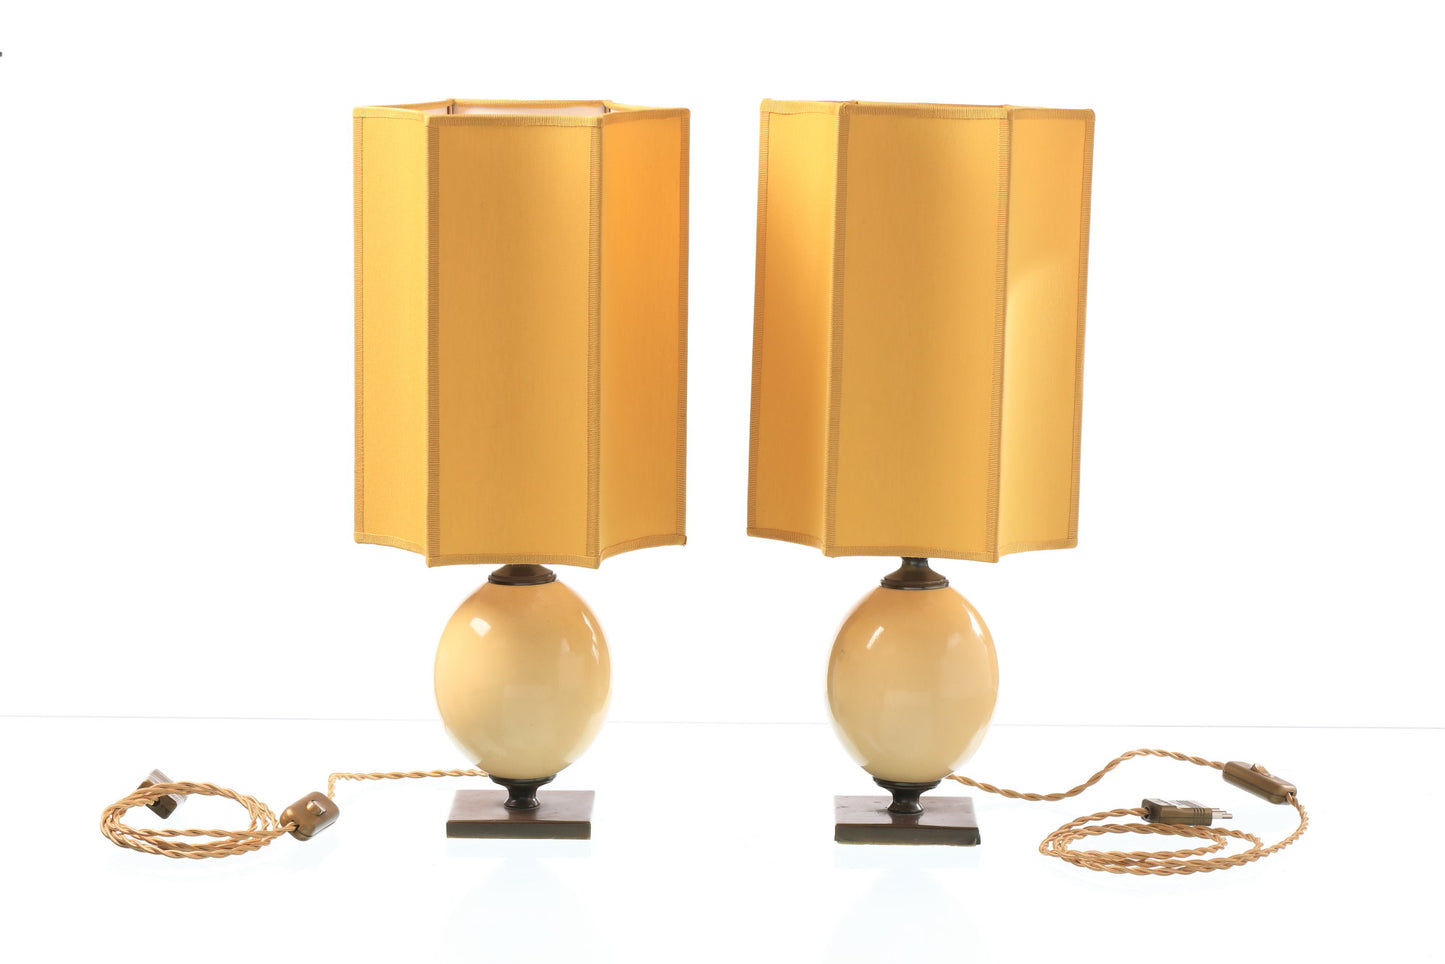 Pair of ostrich egg-shaped lamps